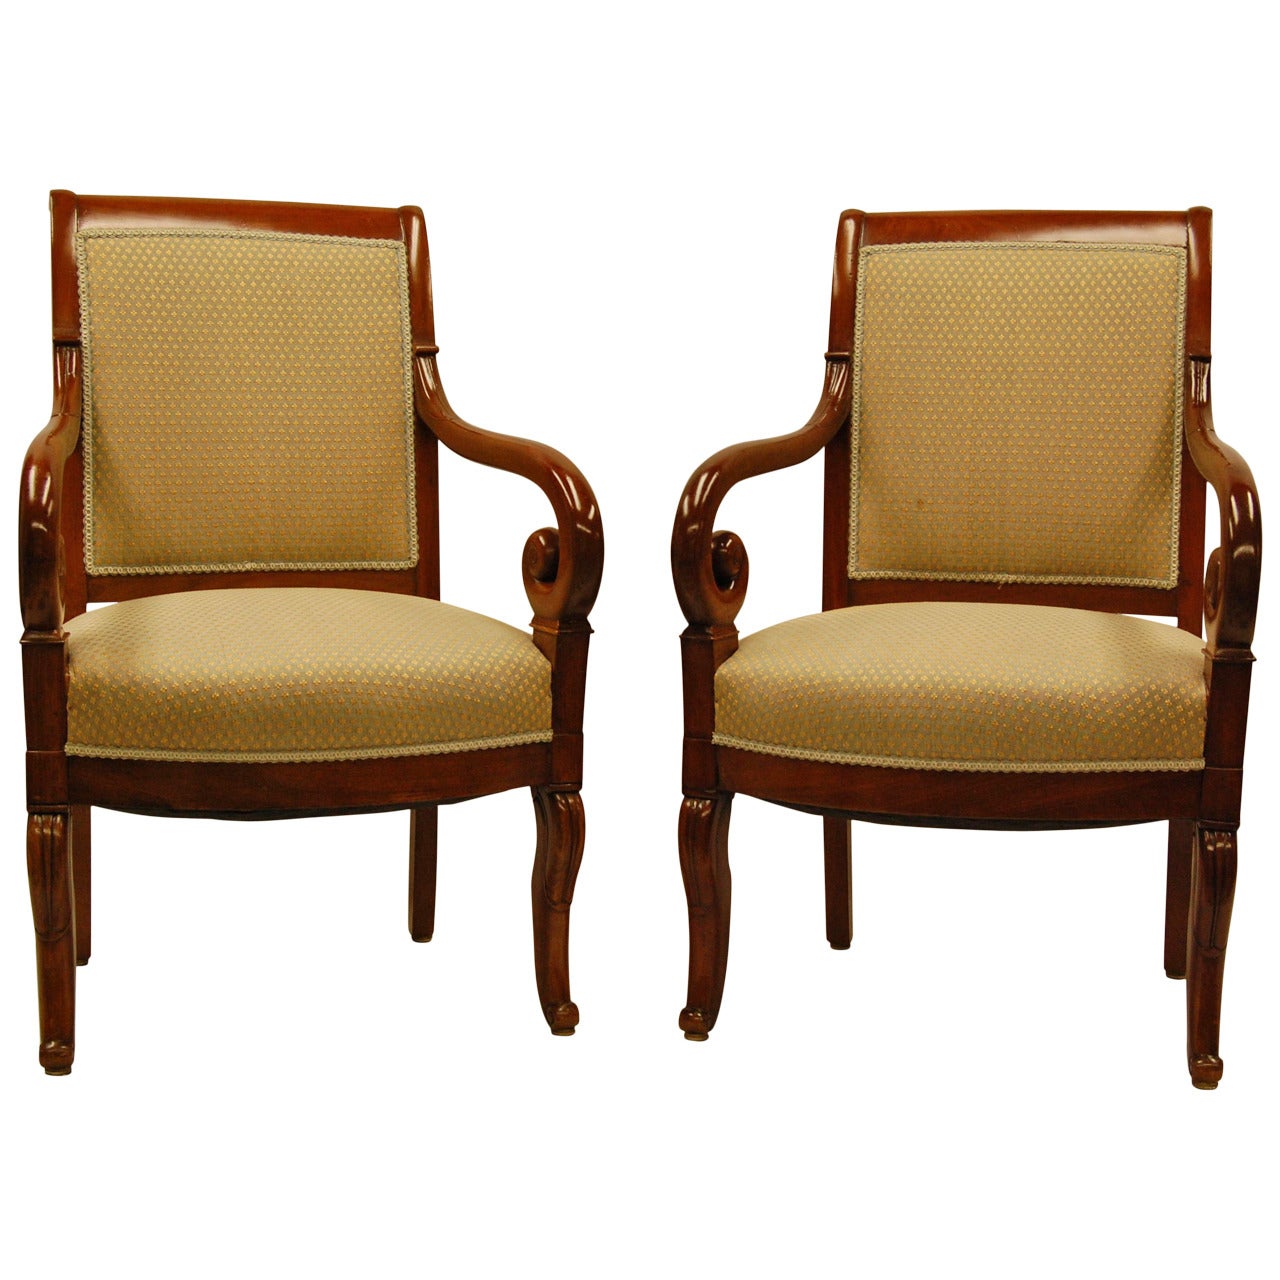 Pair of Carved Mahogany Restauration Period Armchairs, Early 19th Century For Sale